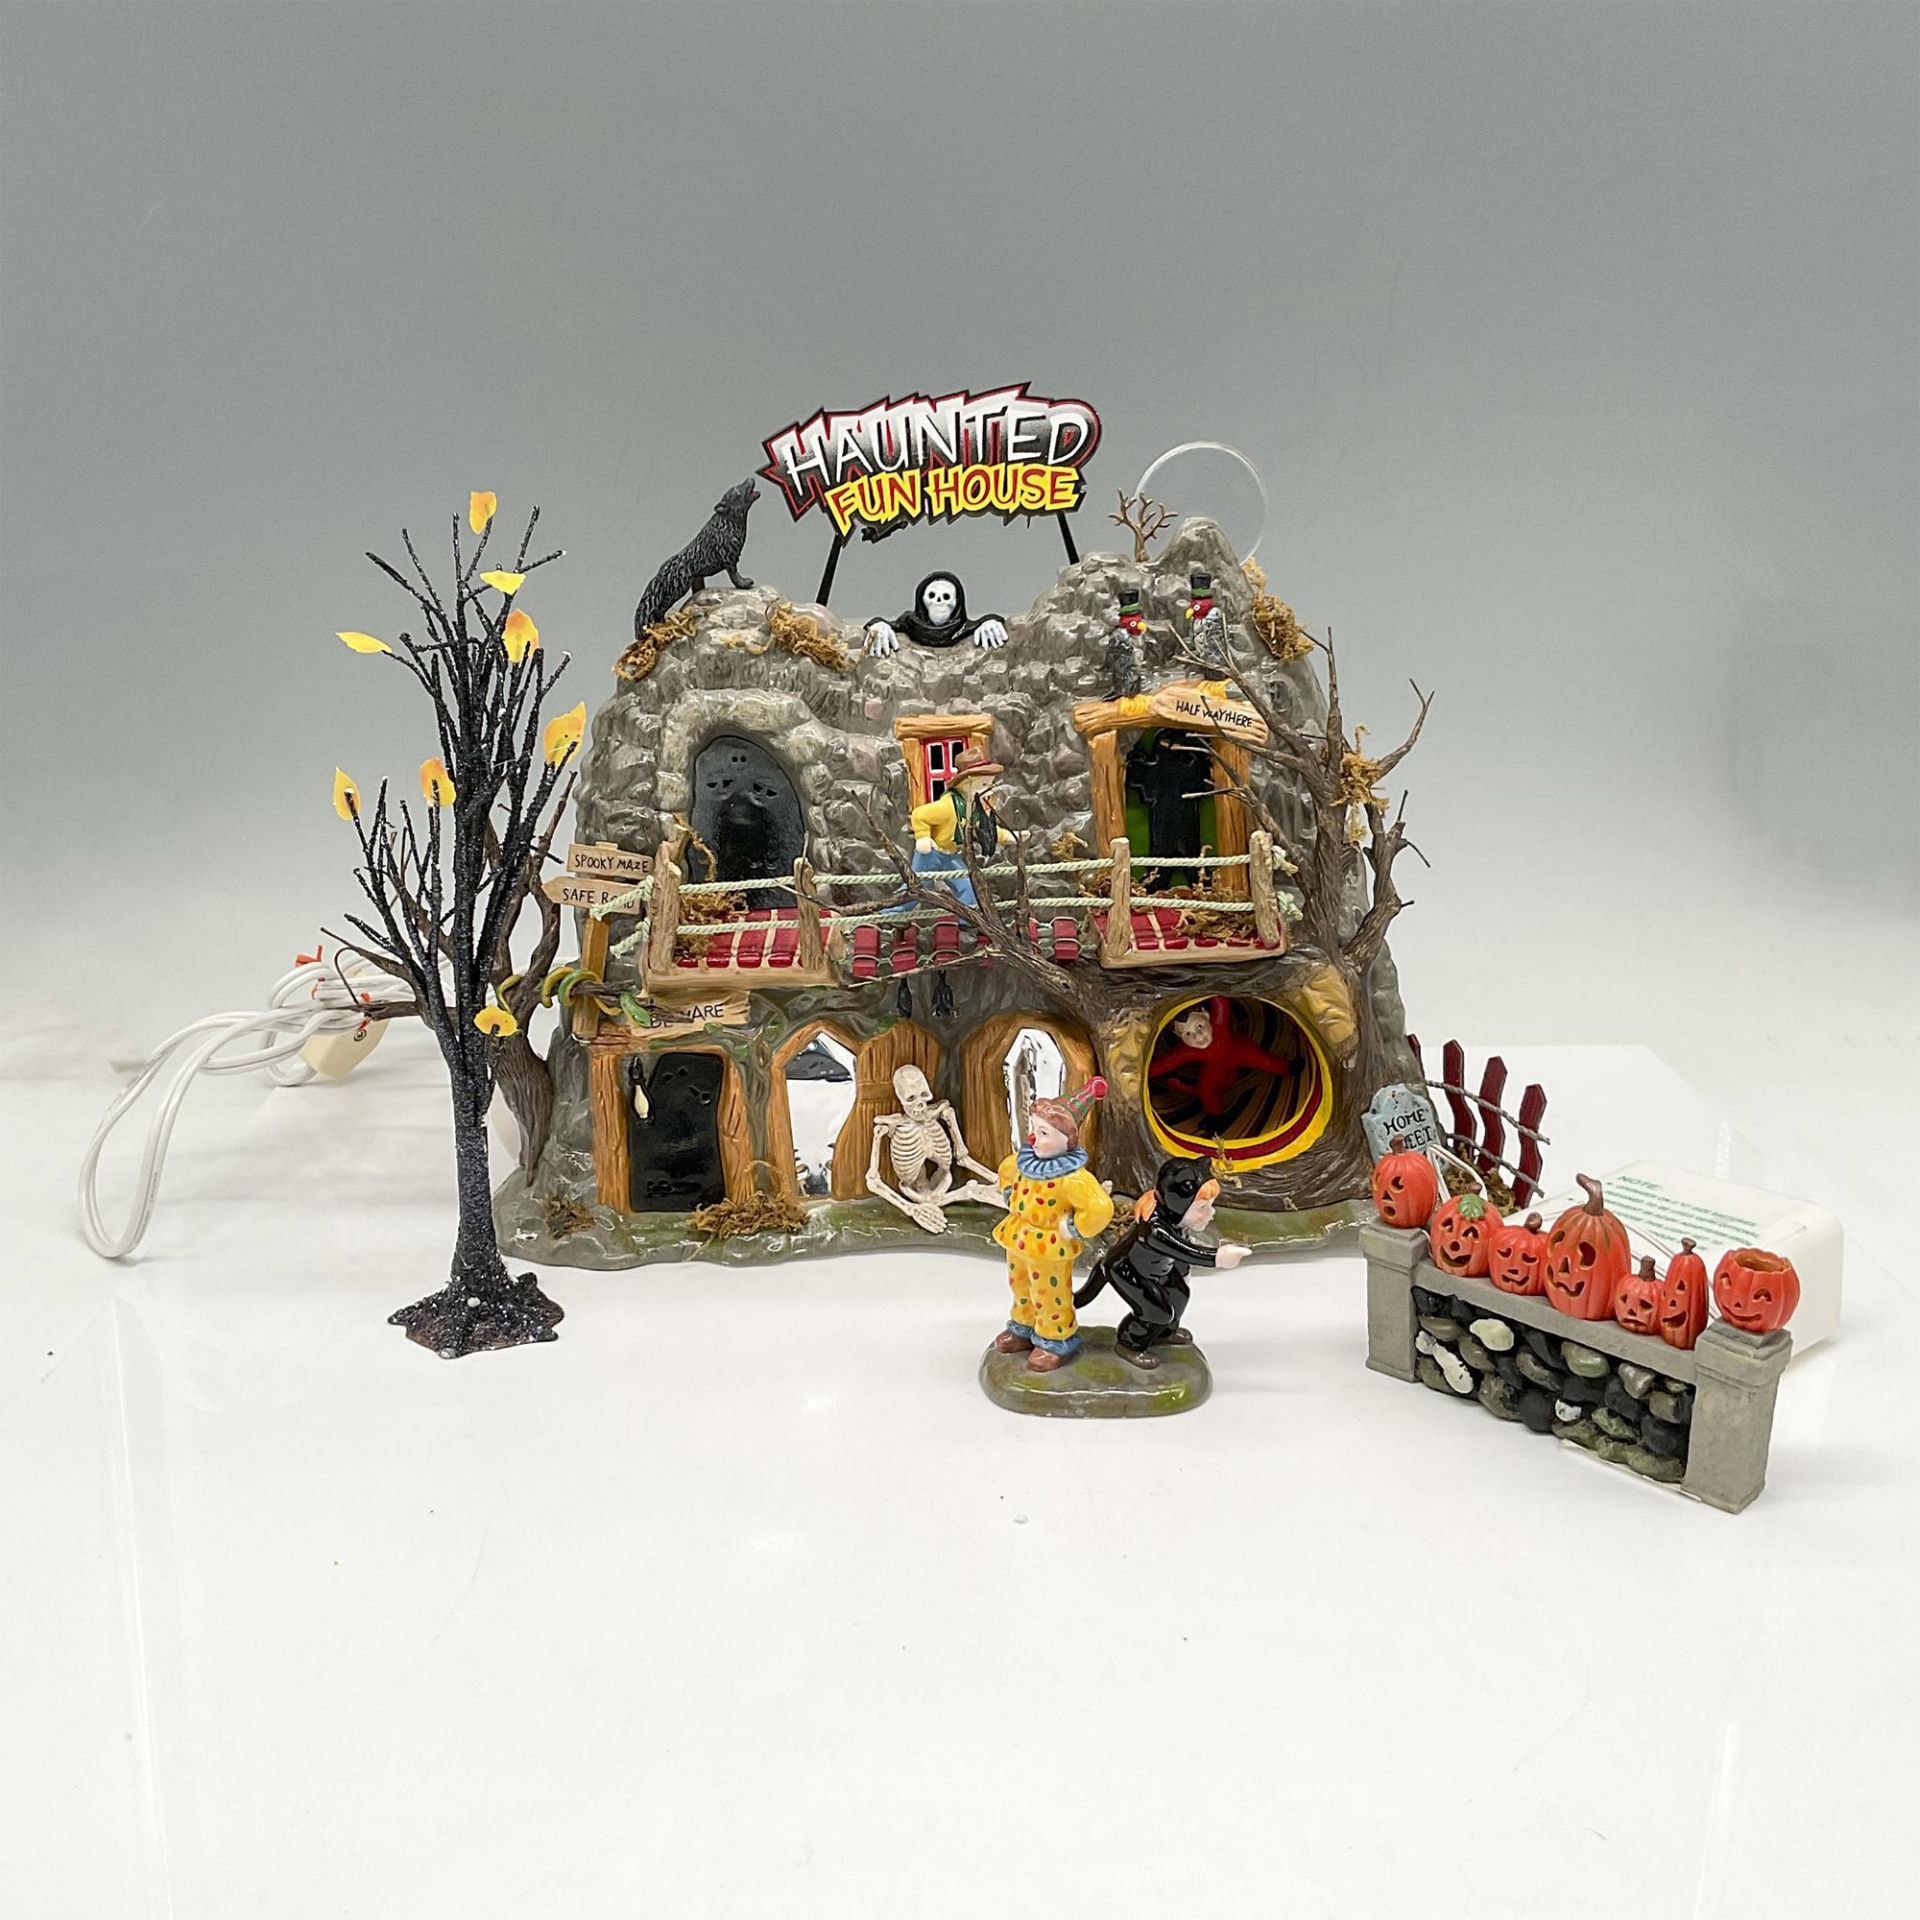 2pc Department 56 Collection, Haunted Fun House + Pumpkins